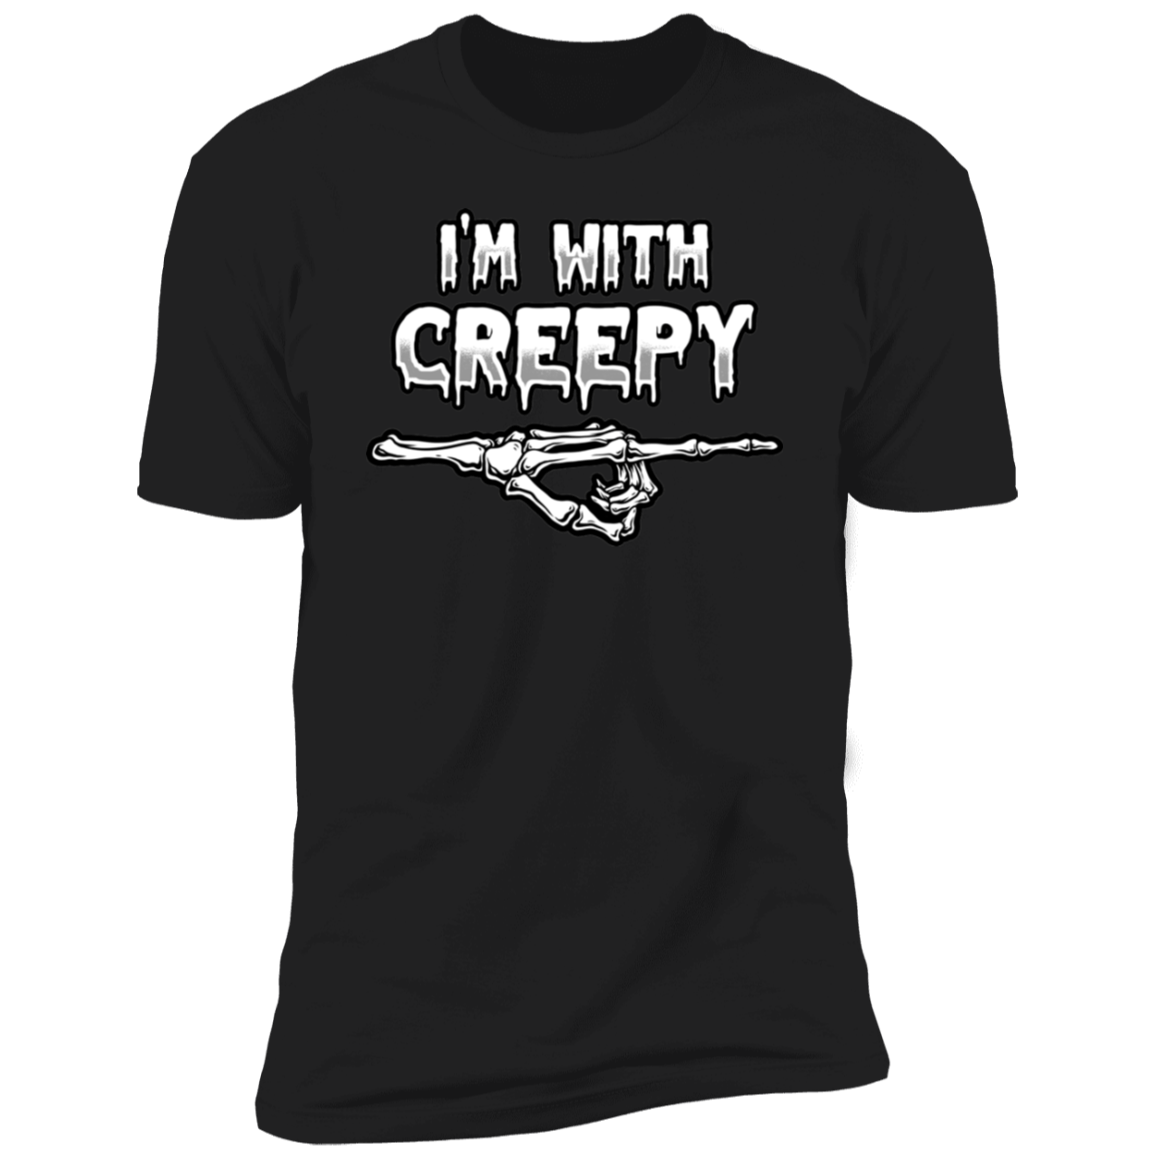 I'm With Creepy & I'm With Spooky Couples Shirts